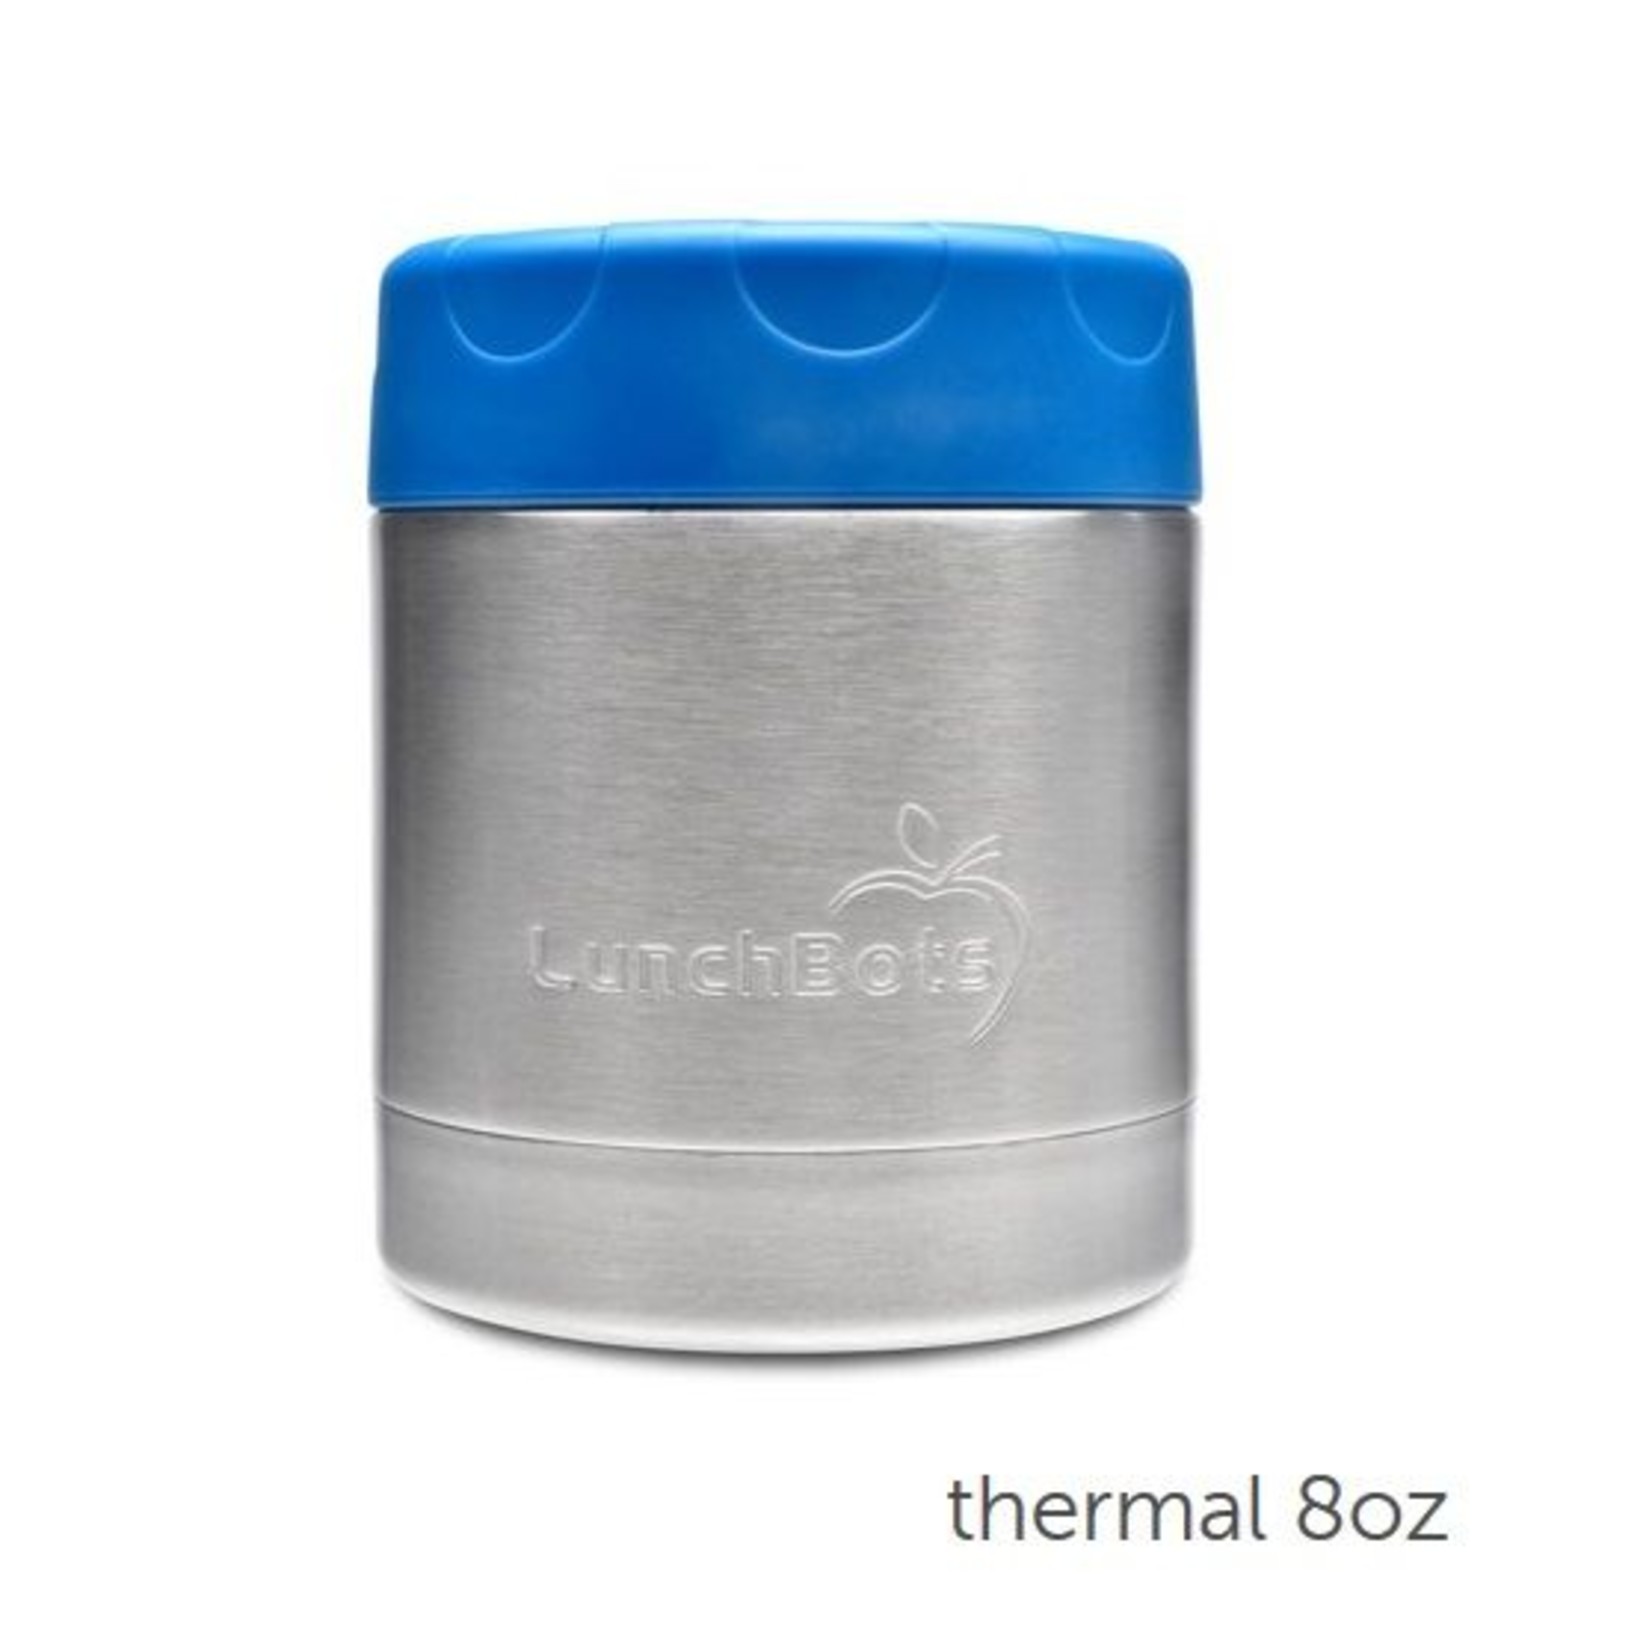 Lunchbots Thermal Voedselcontainer - 235 ml - EkoFamily